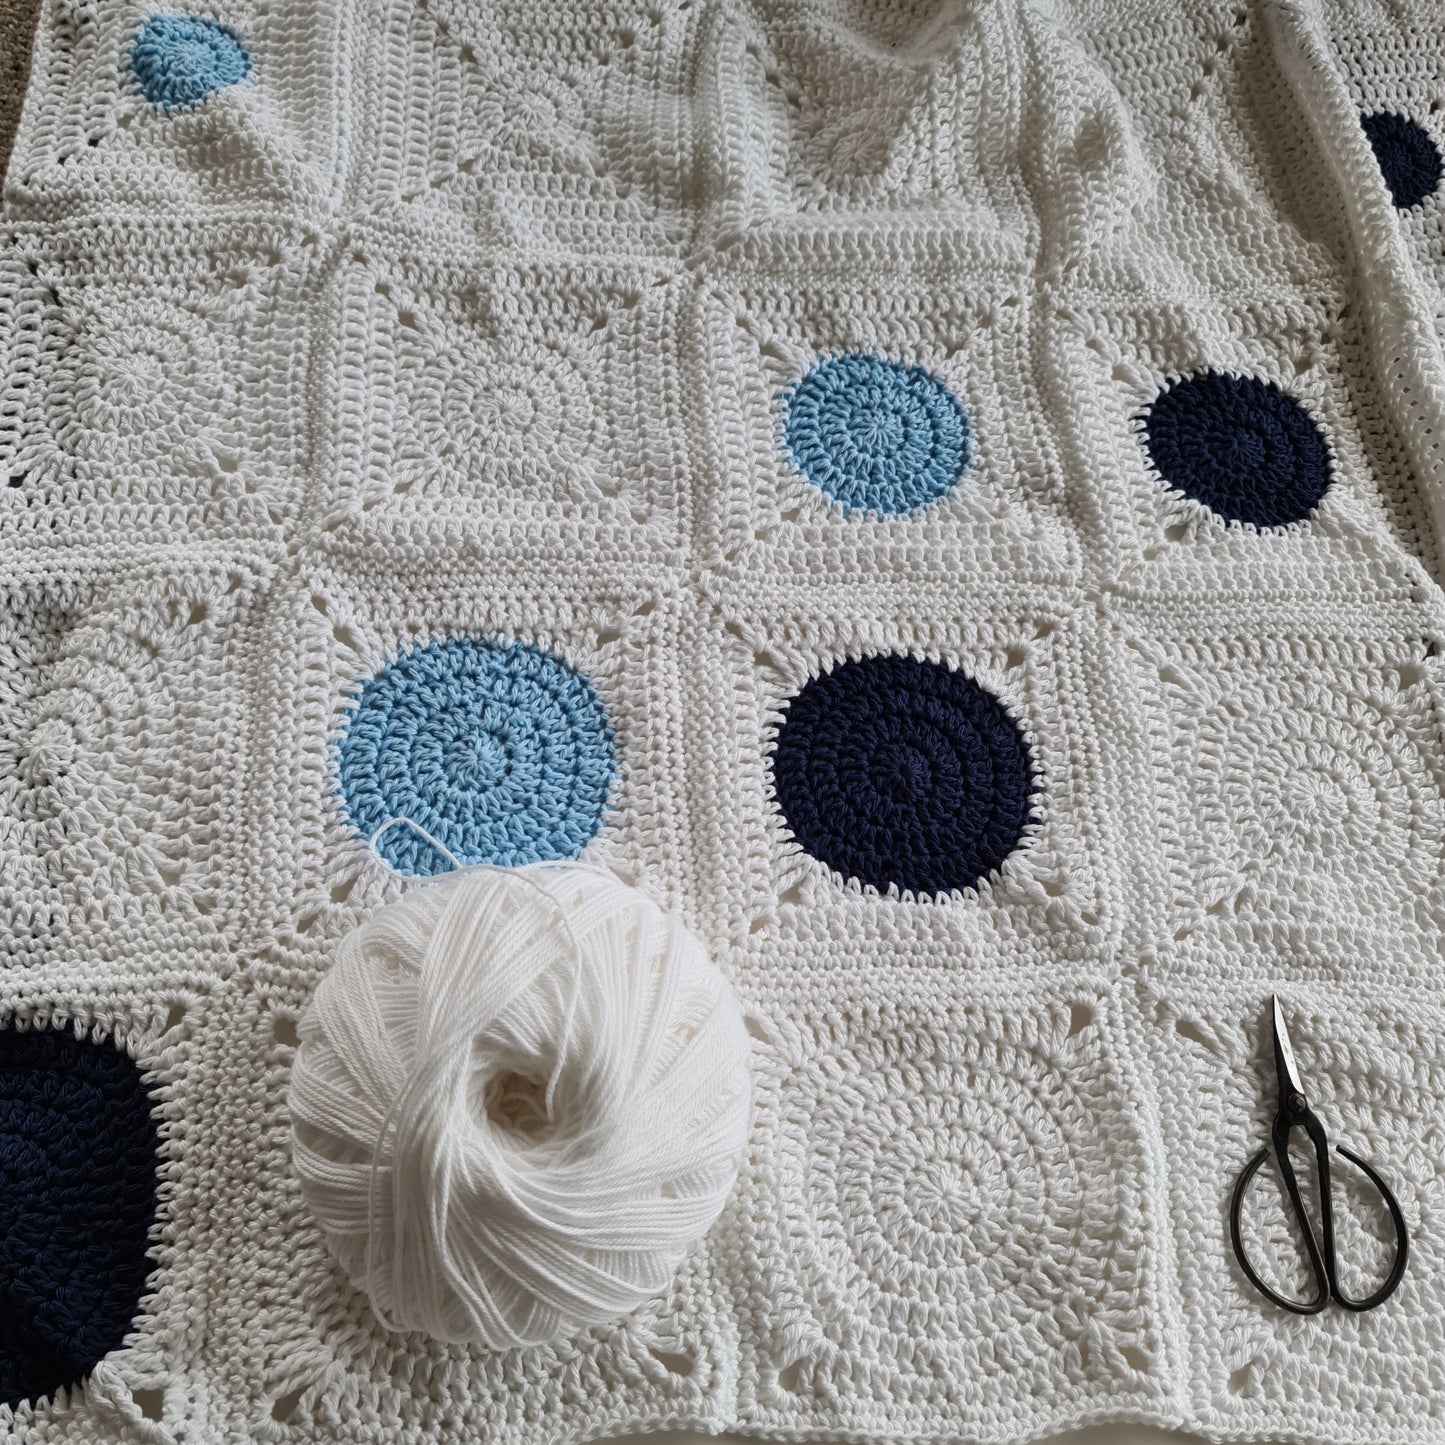 White and blues random version of the Dotty Spotty Blanket with a ball of white yarn and black scissors.